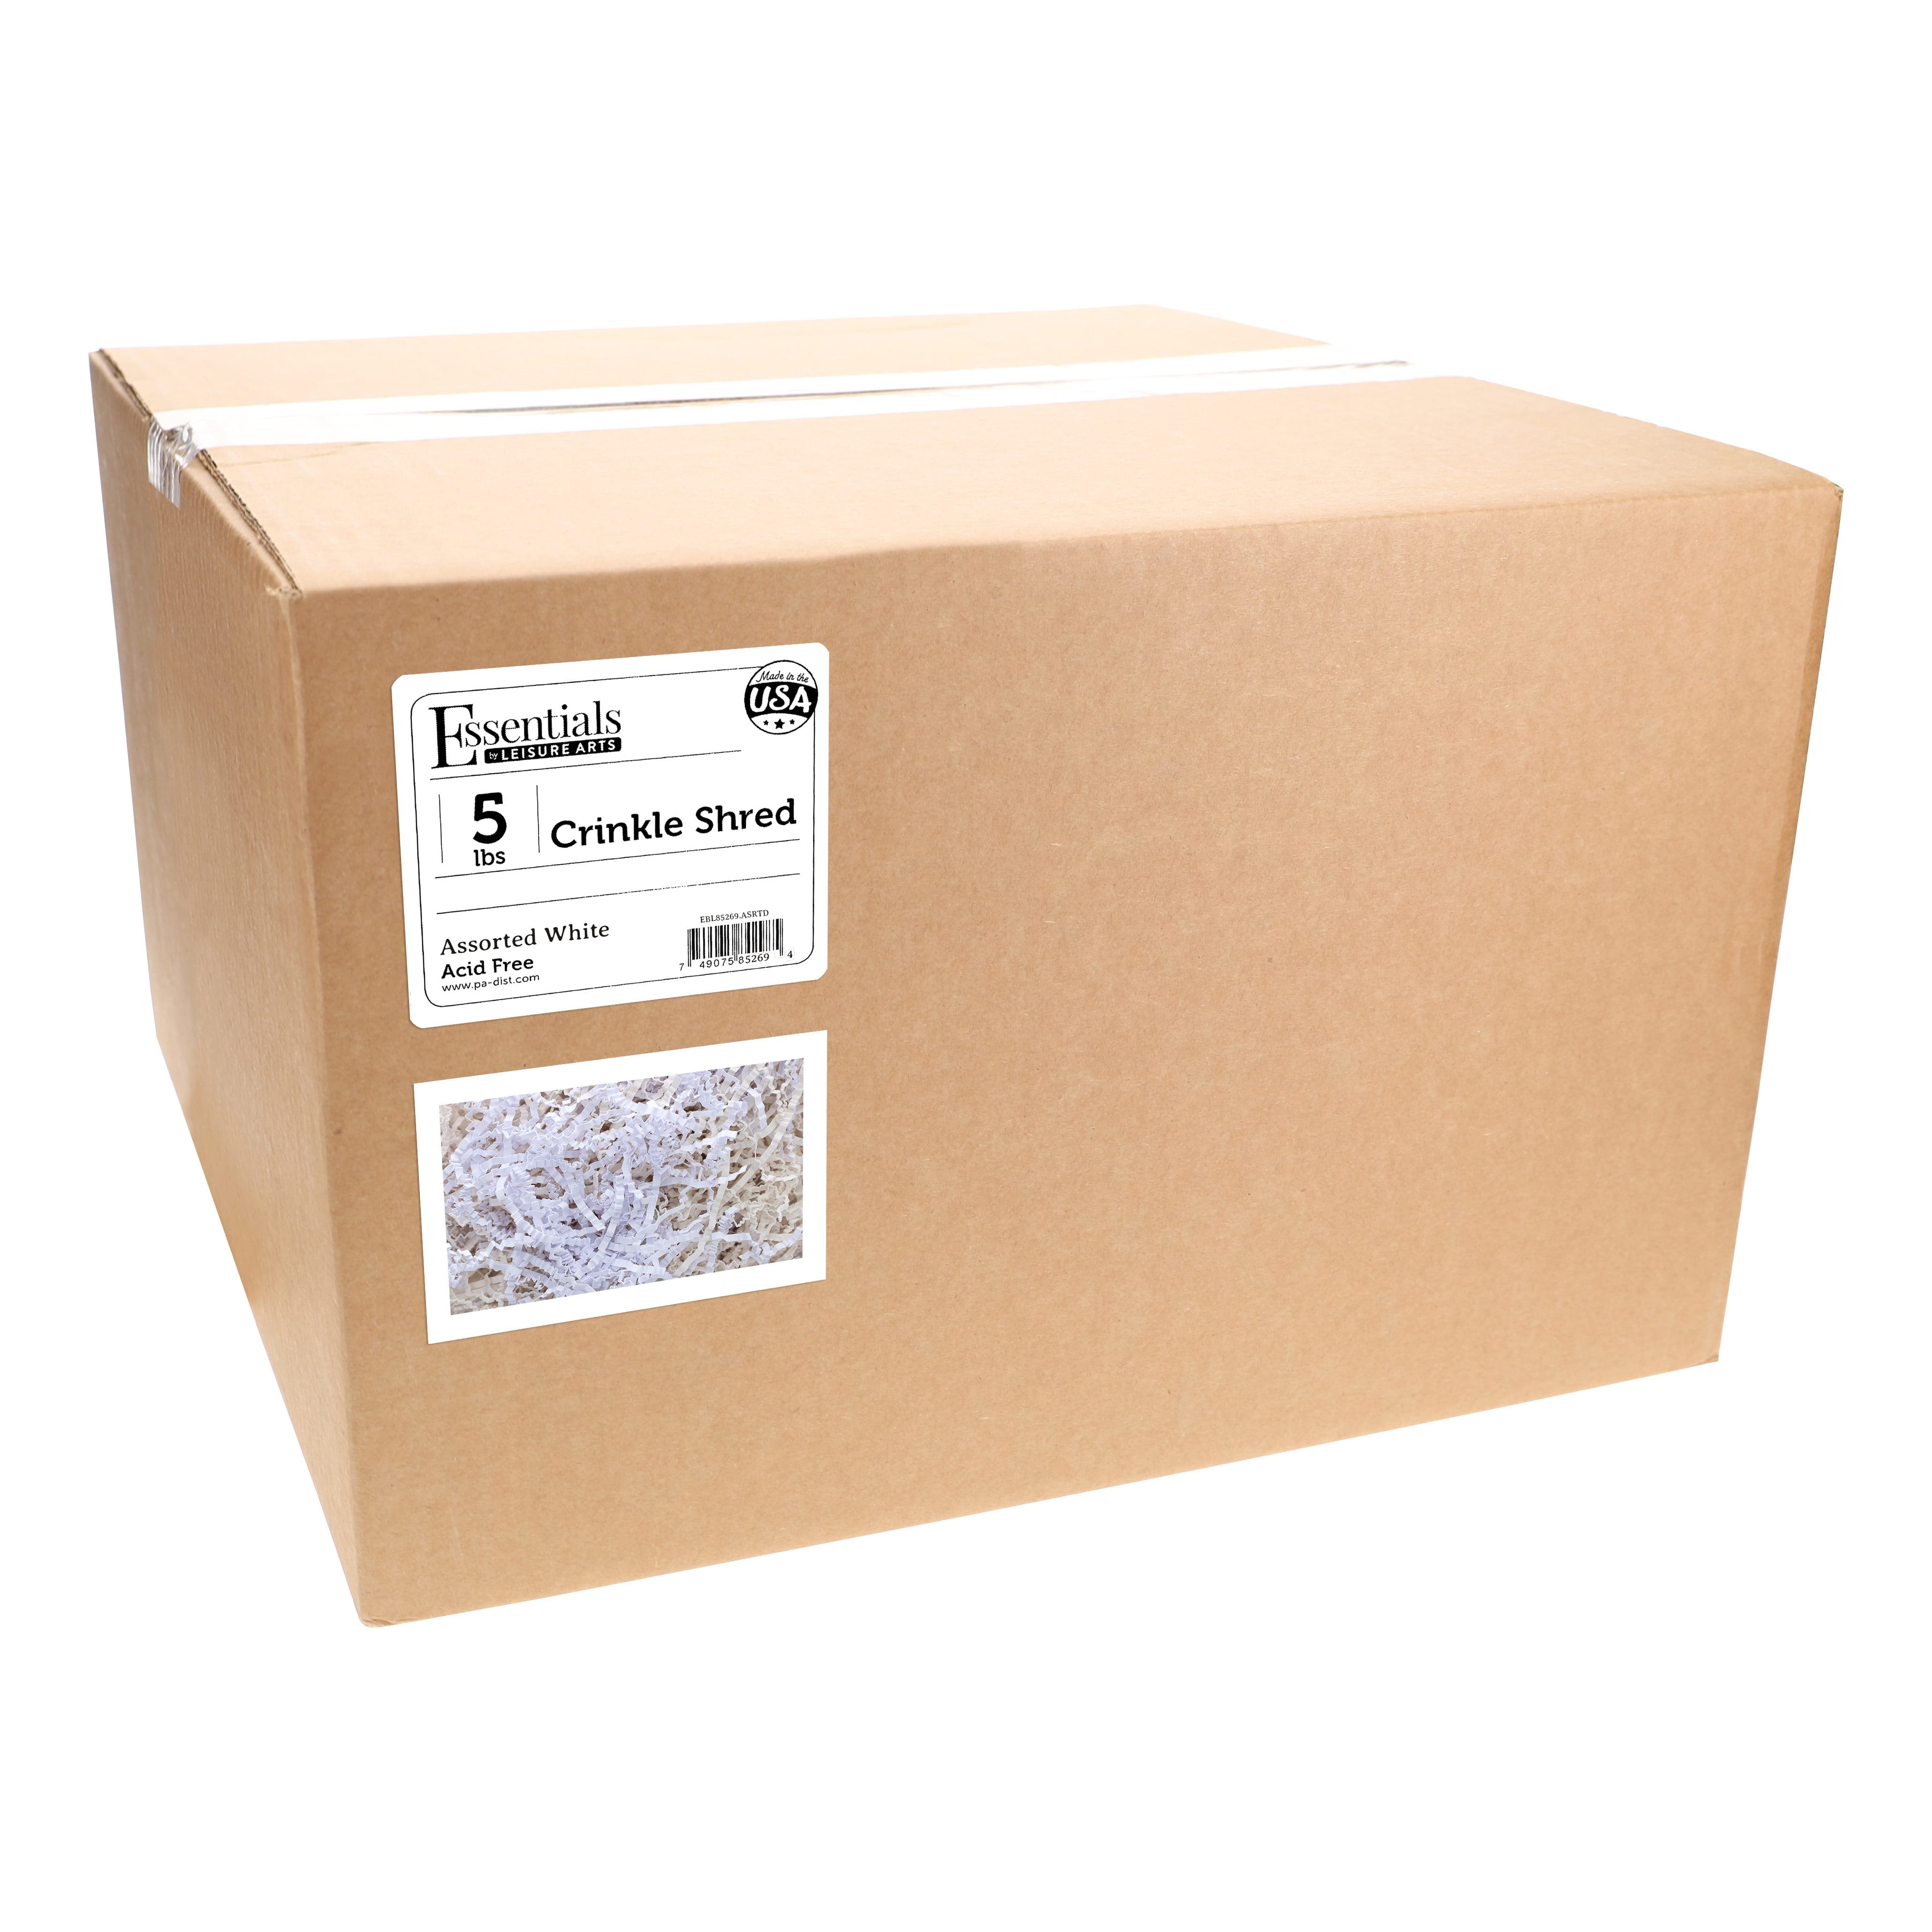 Essentials by Leisure Arts Crinkle Shred Box, 5lb.